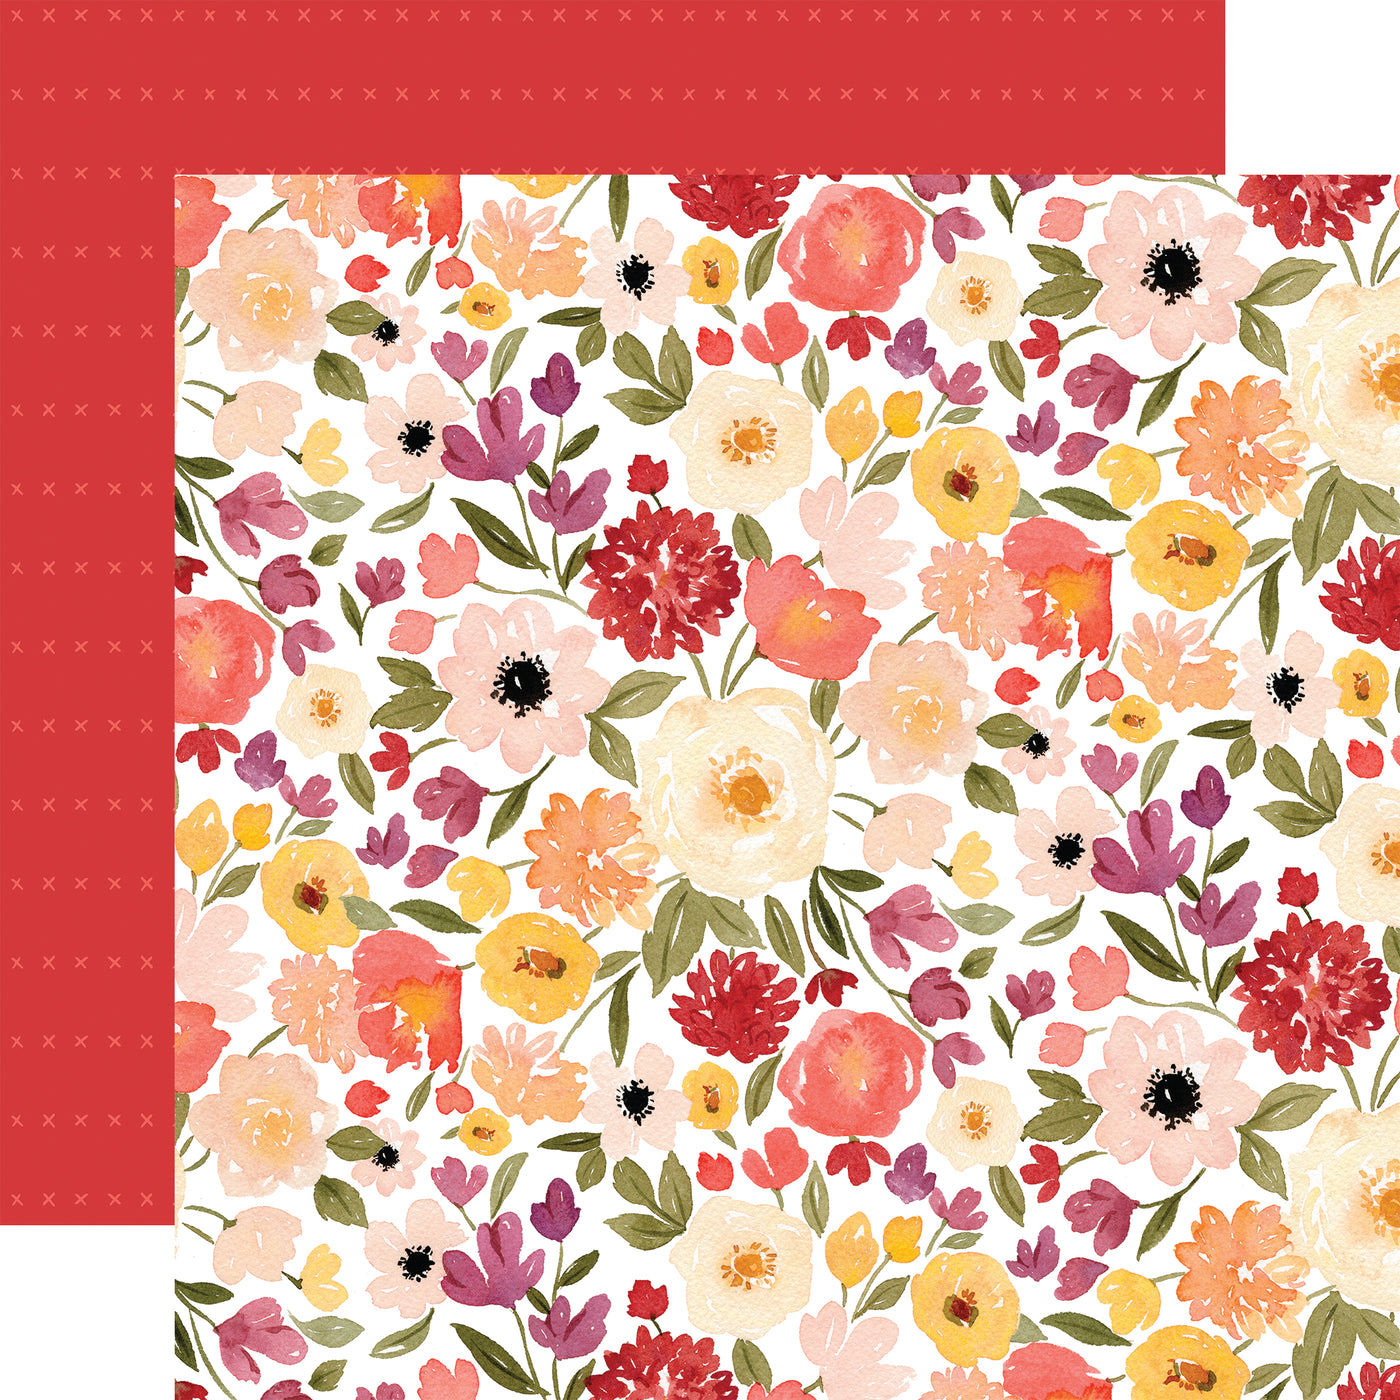 The front side of this paper has a beautiful floral pattern in shades of pink, maroon, yellow, and green. The reverse side is red with horizontal rows of x's. 